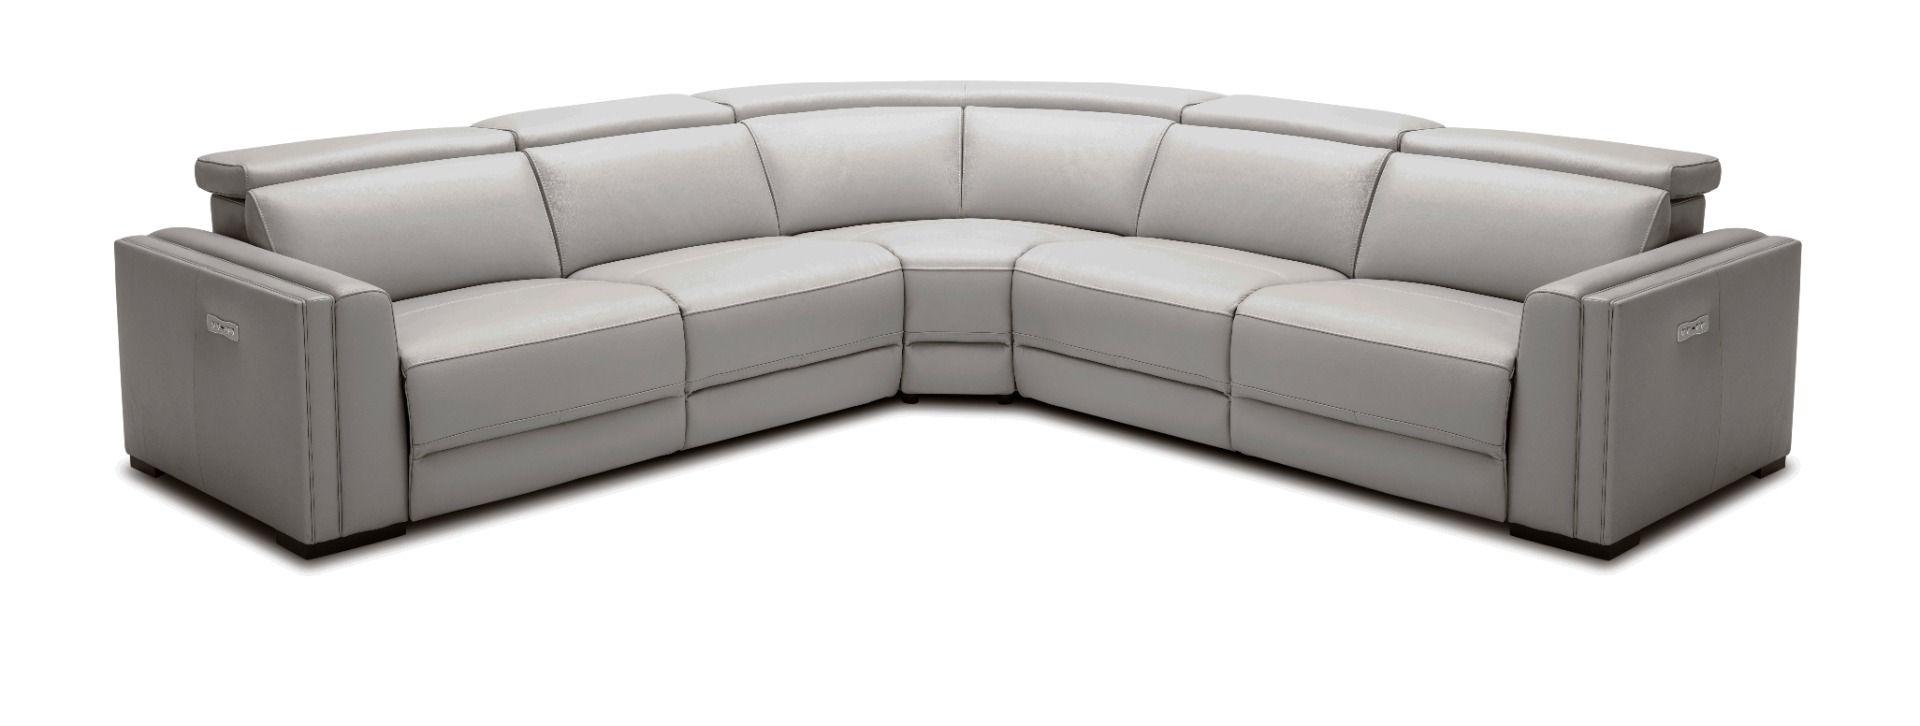 

    
Contemporary Gray Solid Wood Sectional Sofa With Recliners VIG Furniture Modrest Frazier VGKM-KM268H-LG-GRY-SECT-SS
